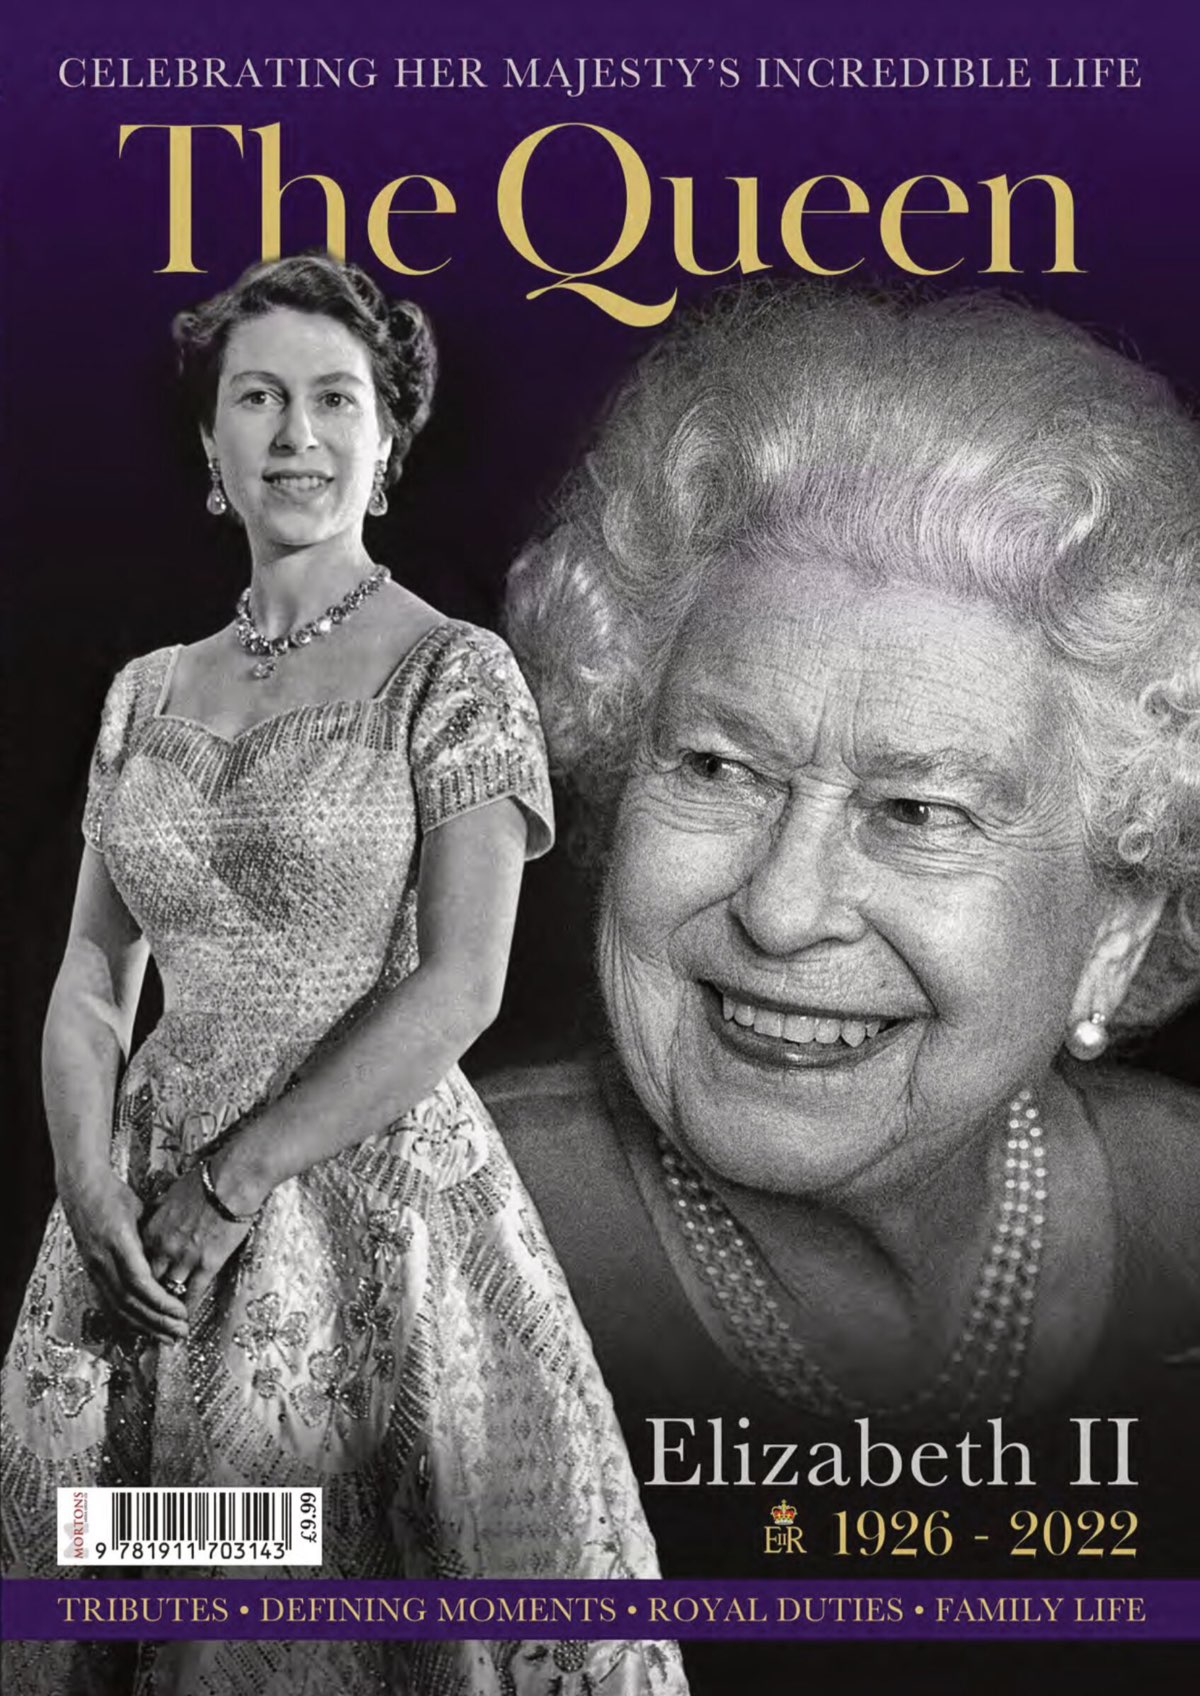 The Queen - Celebrating Her Majesty's Incredible Life! (2022)